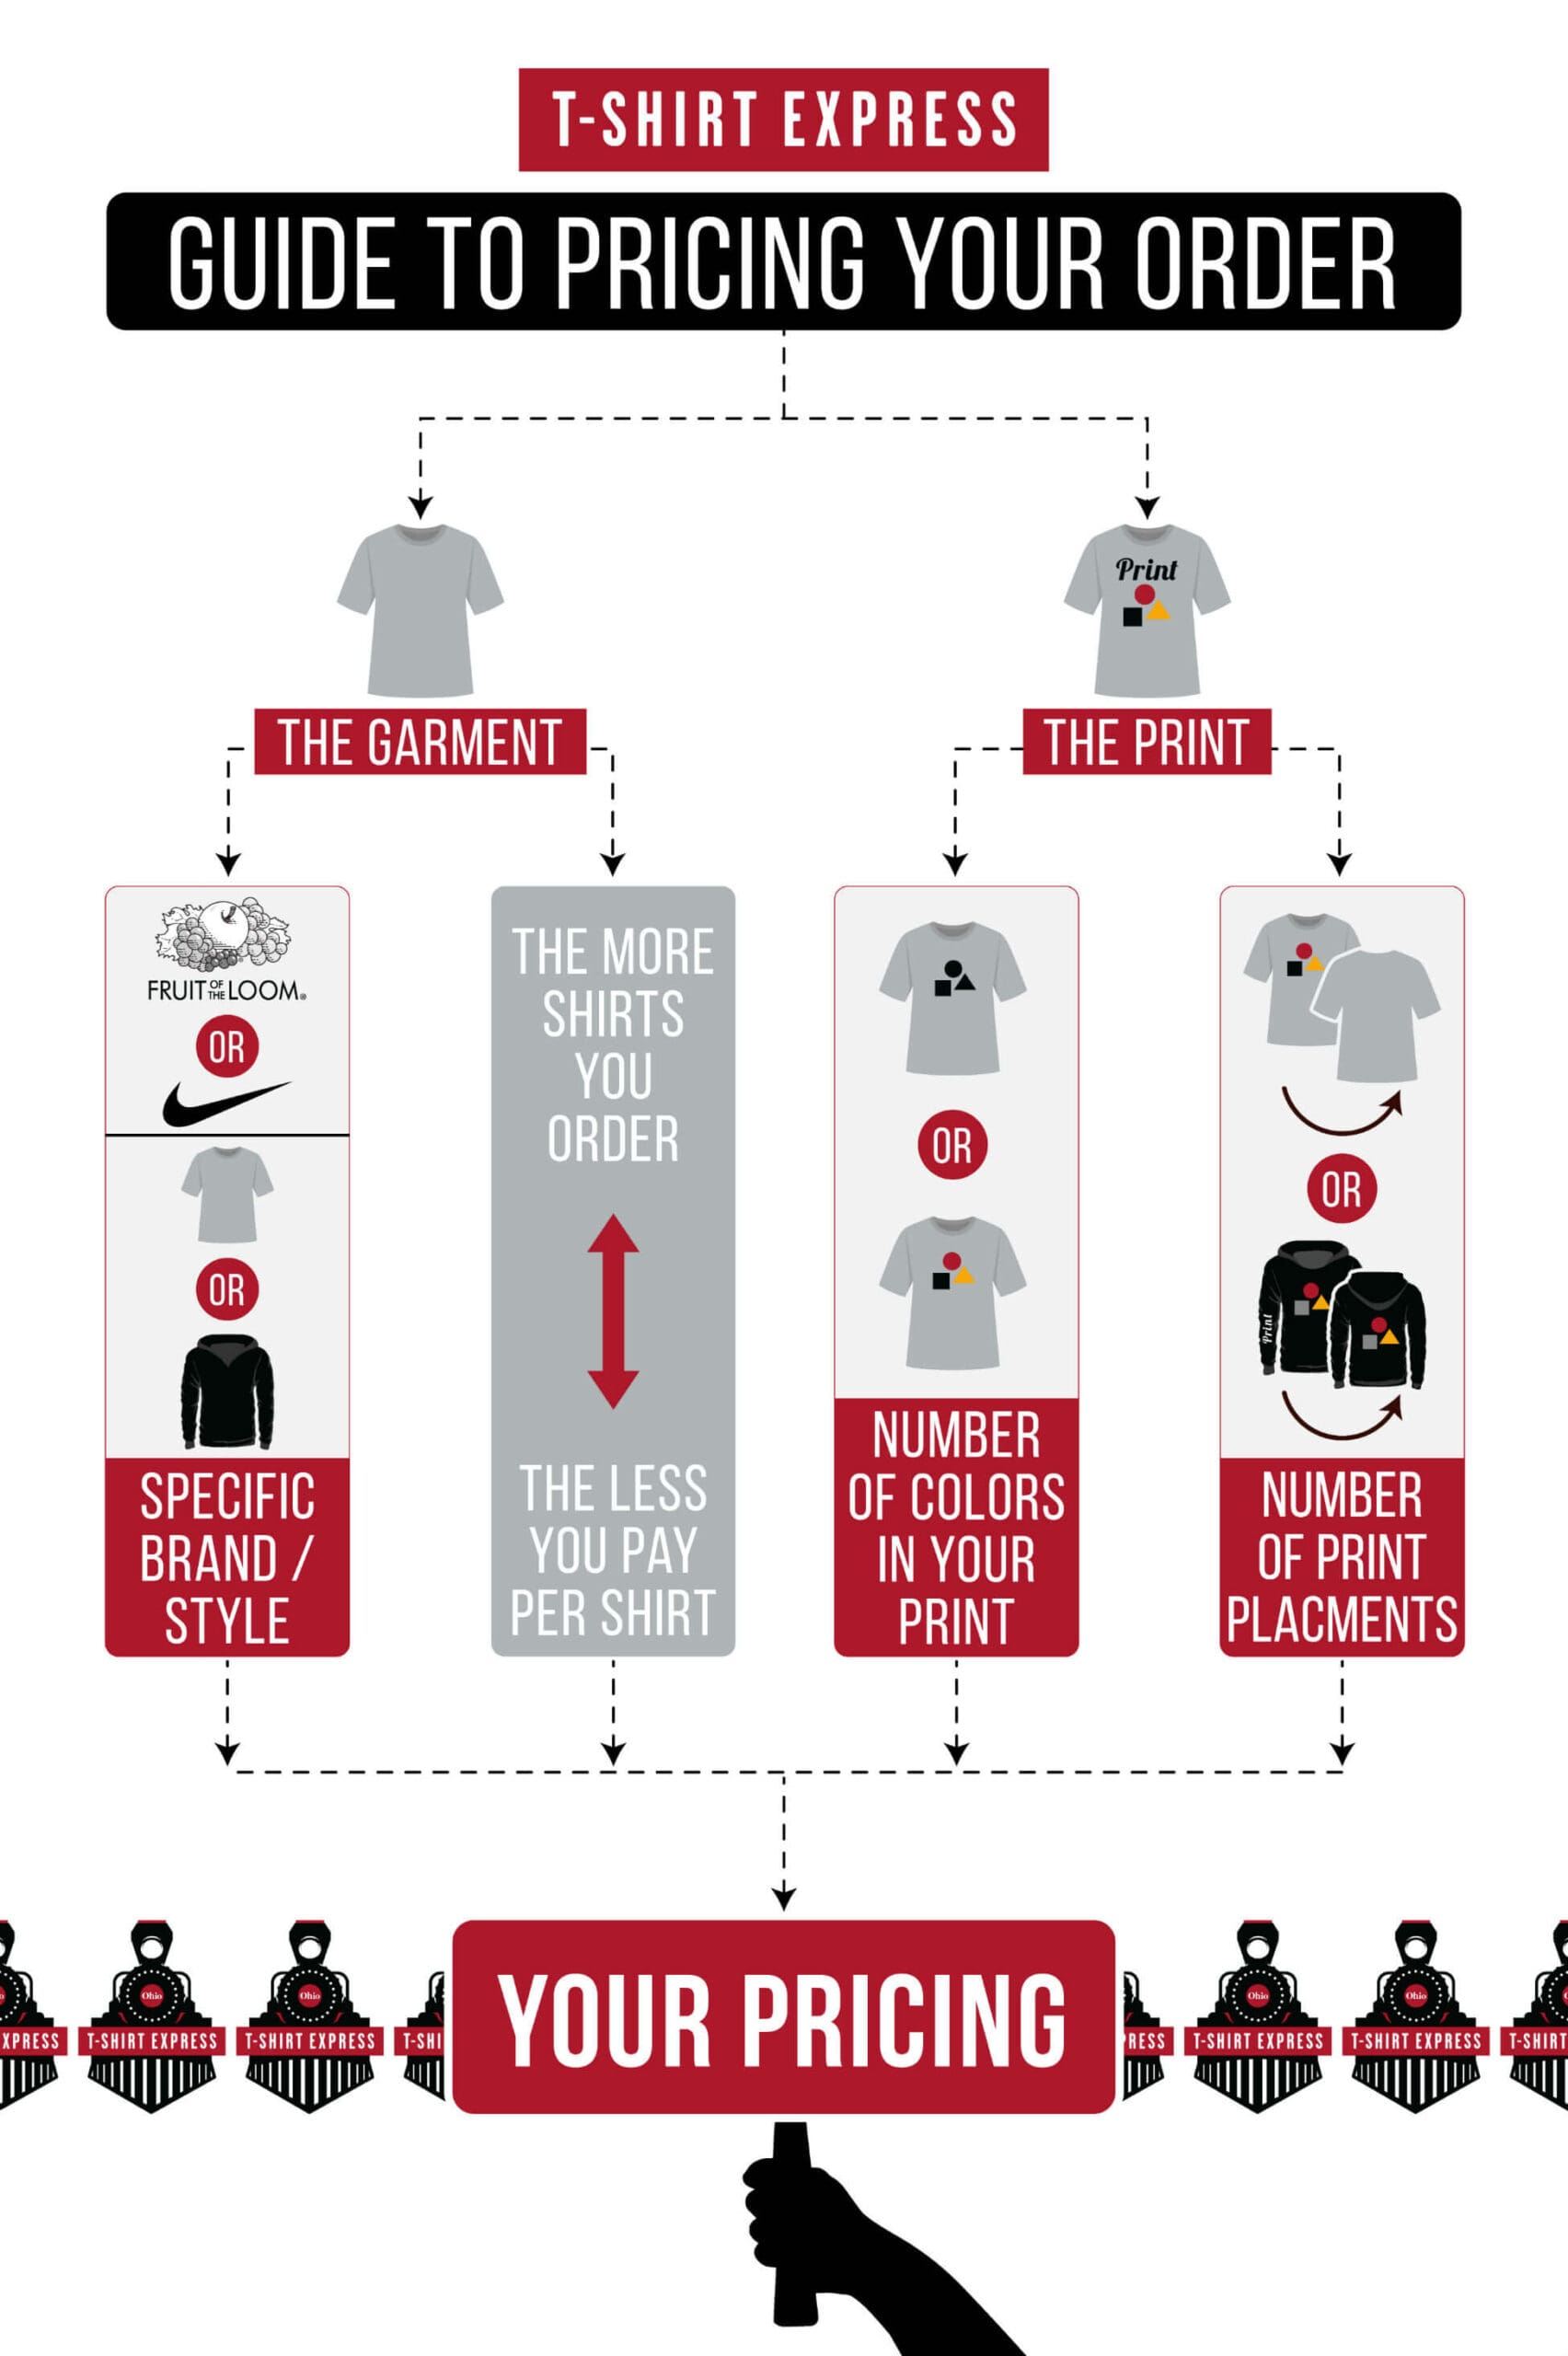 t-shirt express guide to pricing for Four Corners